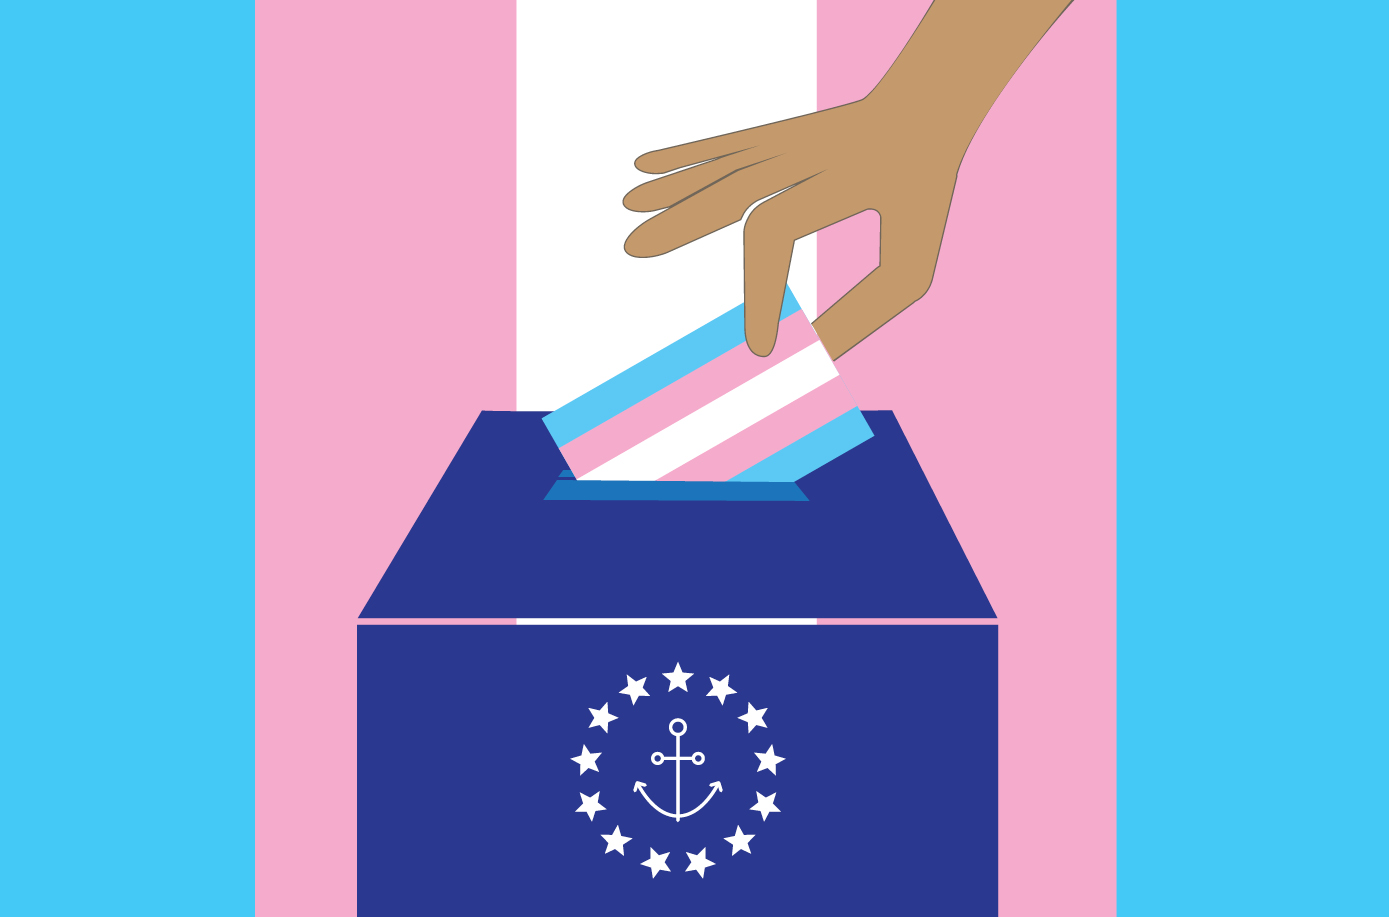  Voting While Trans in Rhode Island Vote, Get a Voter ID that better represents you!